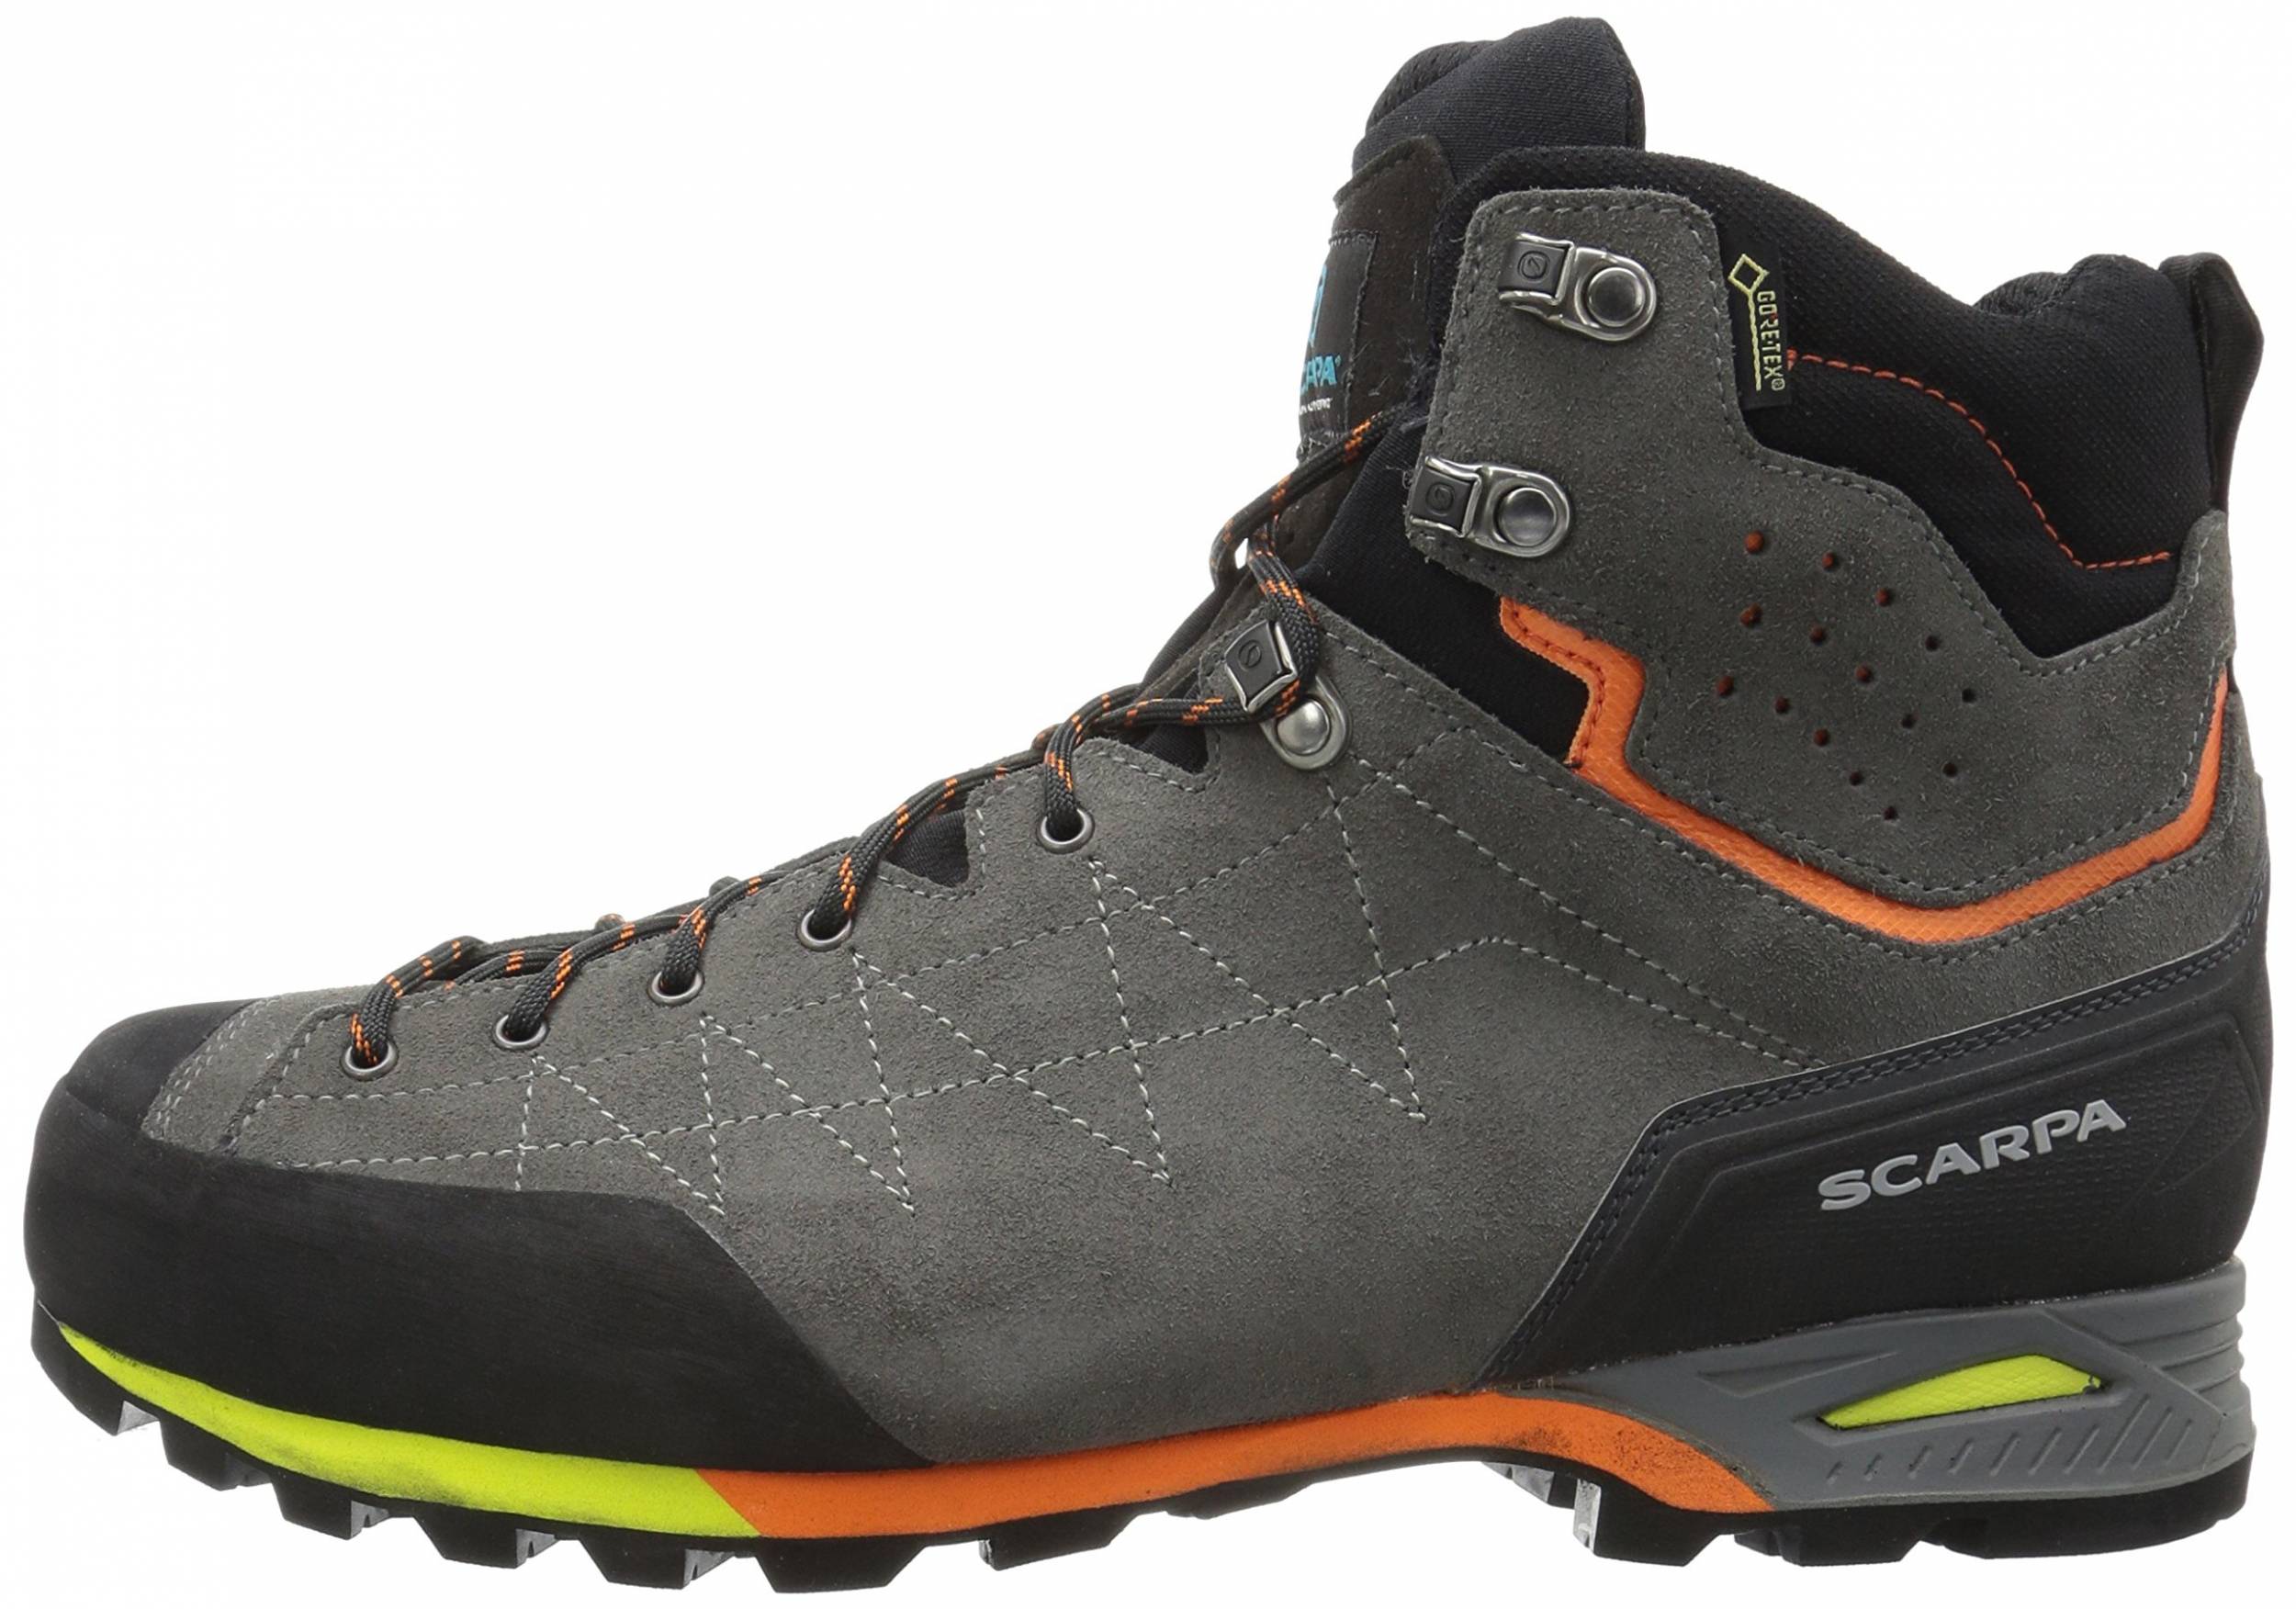 Save 25% on Scarpa Hiking Boots (18 